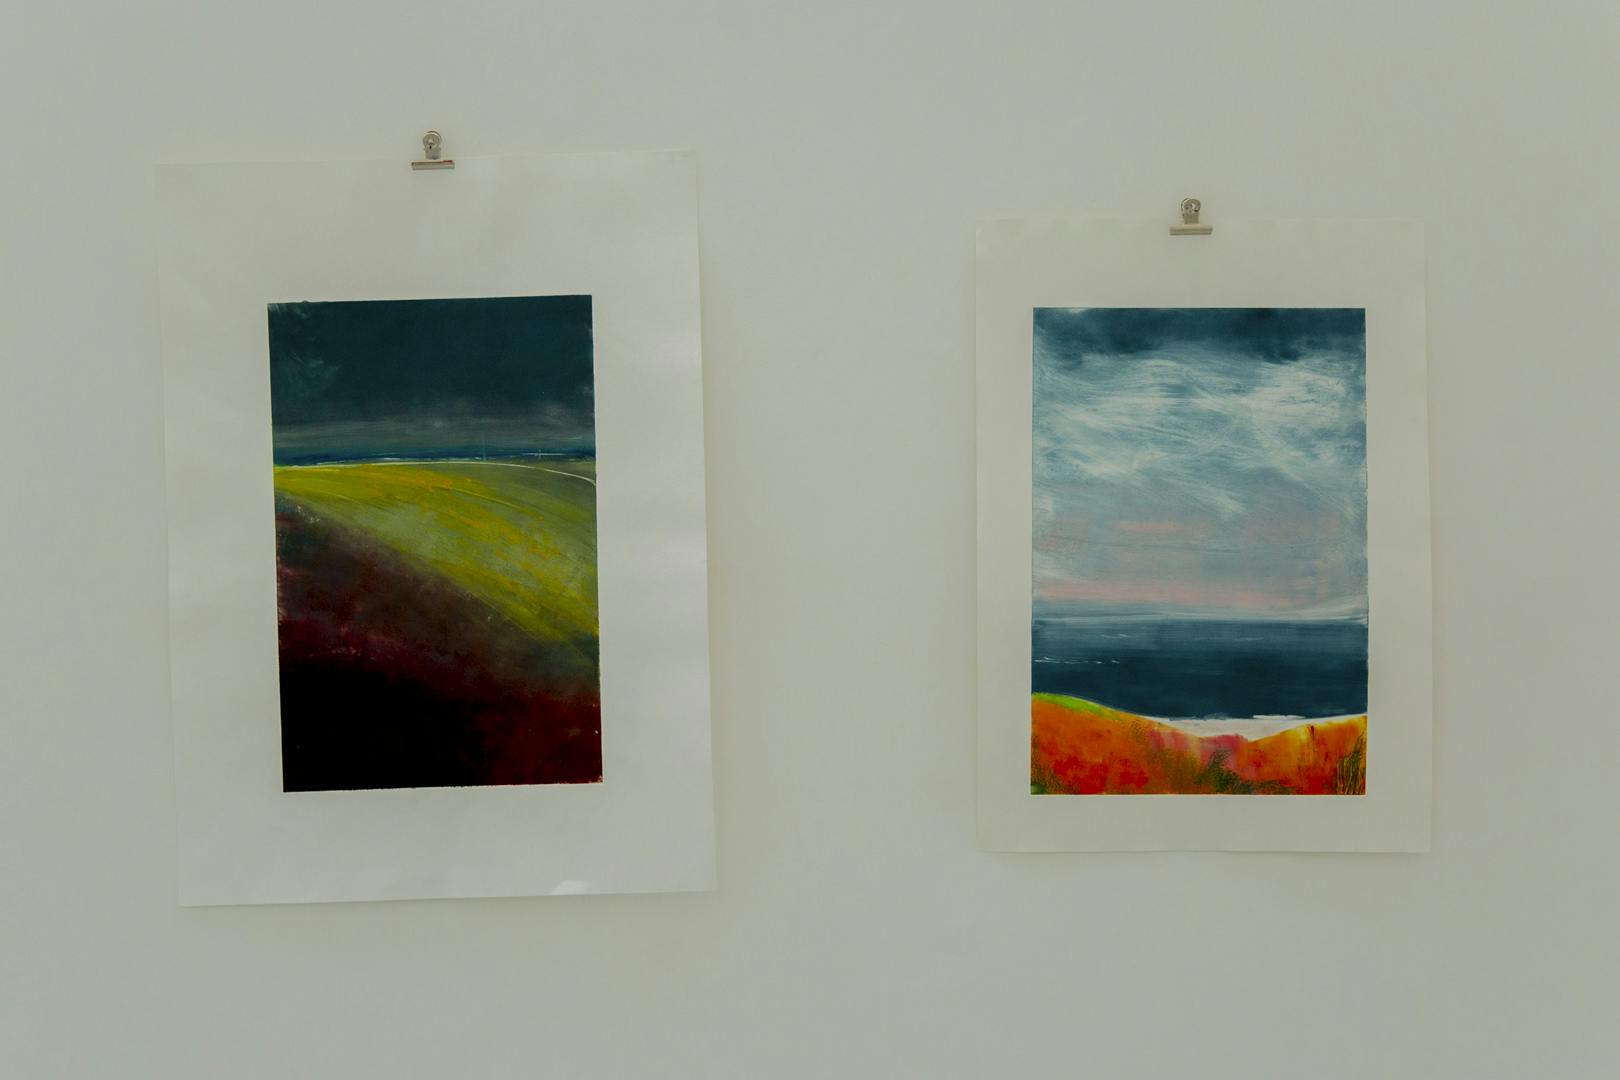 An image of two of Martine's paintings that are on paper and hung by bulldog clips, the paintings show landscape imagery with interesting colour palette choices